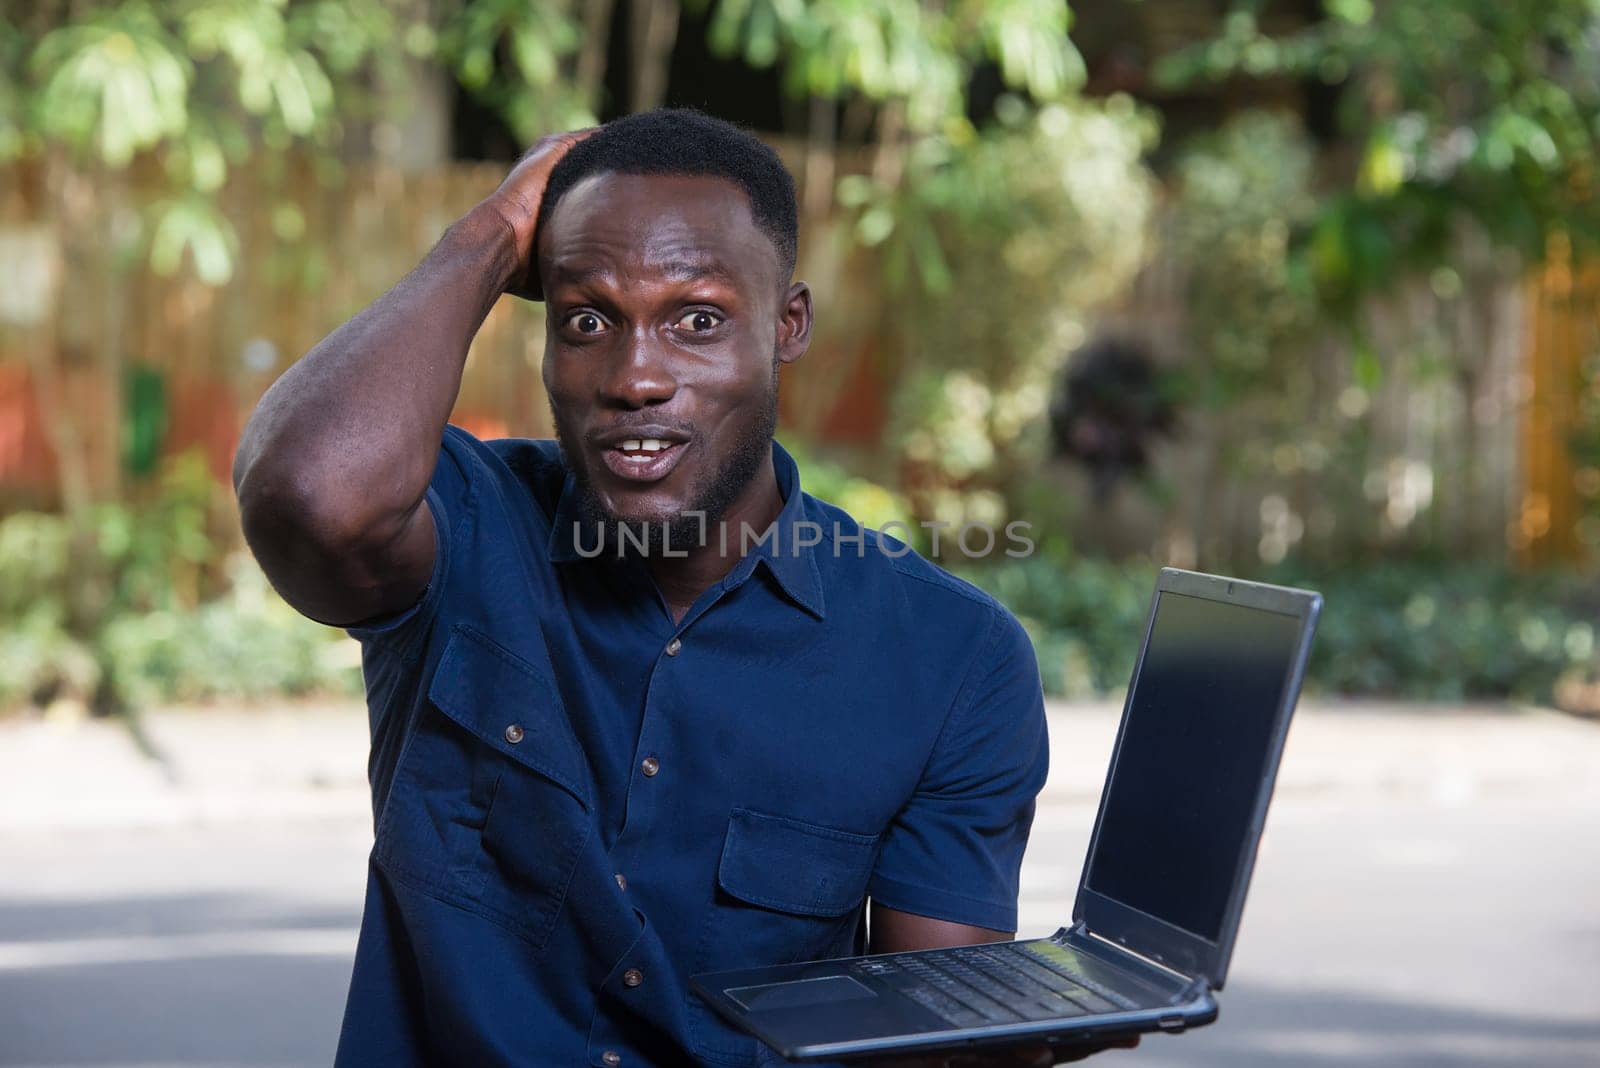 young man with laptop sitting outdoors looking at camera smiling.